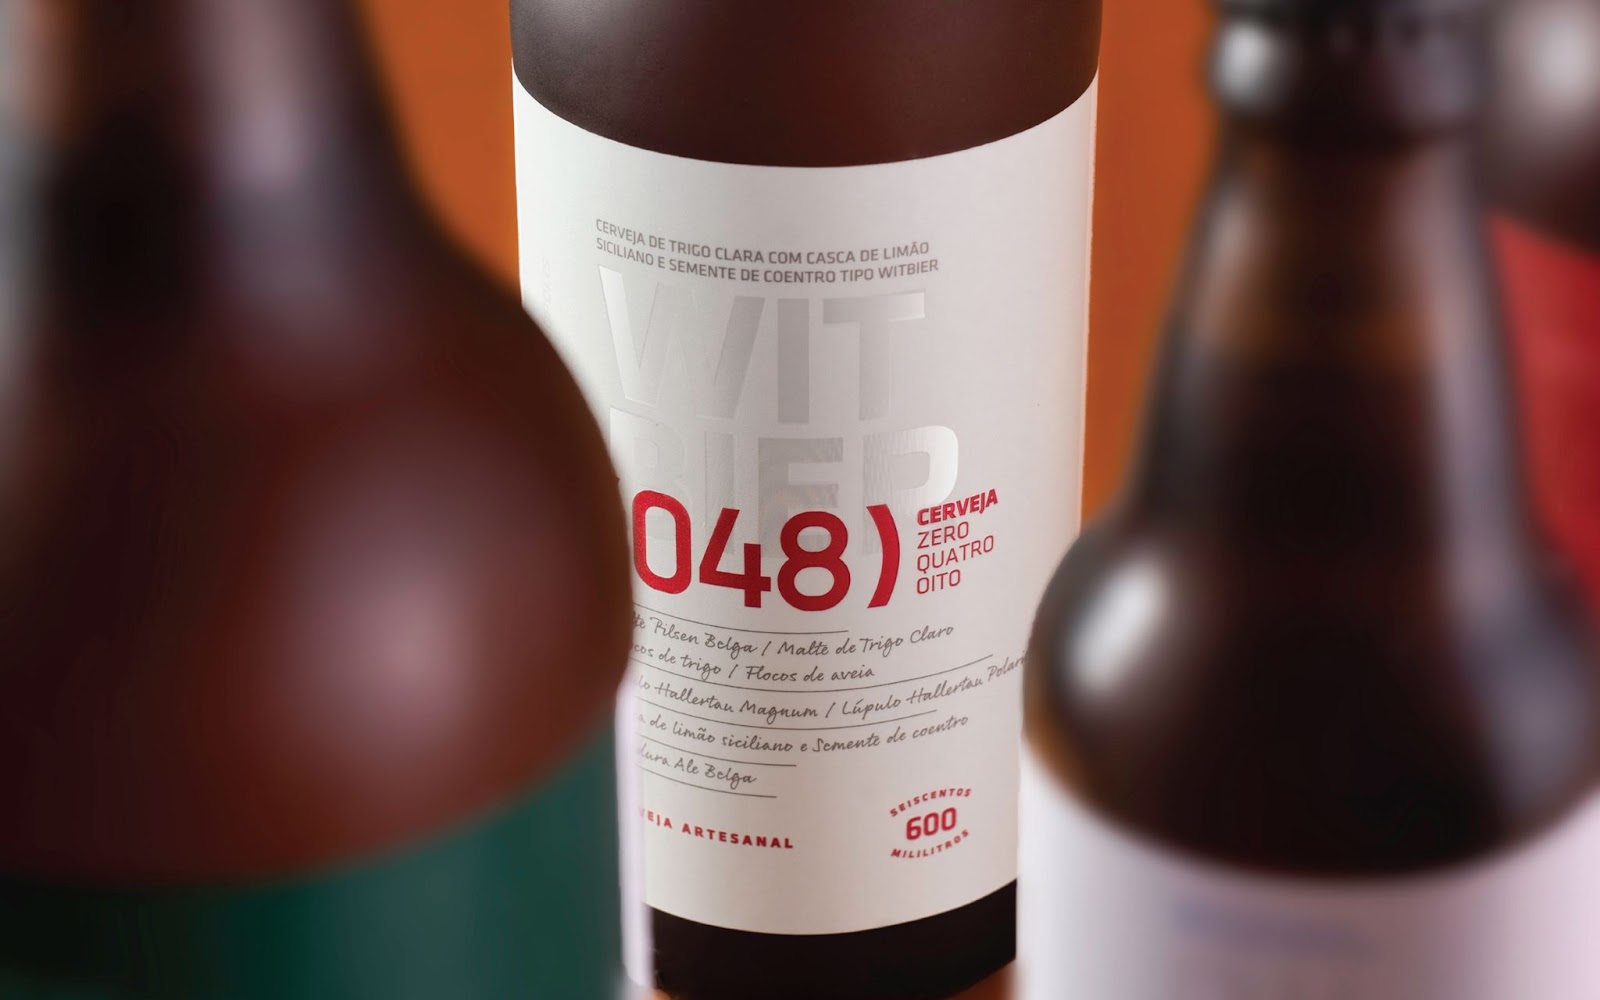 Artifact from the Brewing Visual Impact: Typography in Cerveja (048)'s Packaging Design article on Abduzeedo